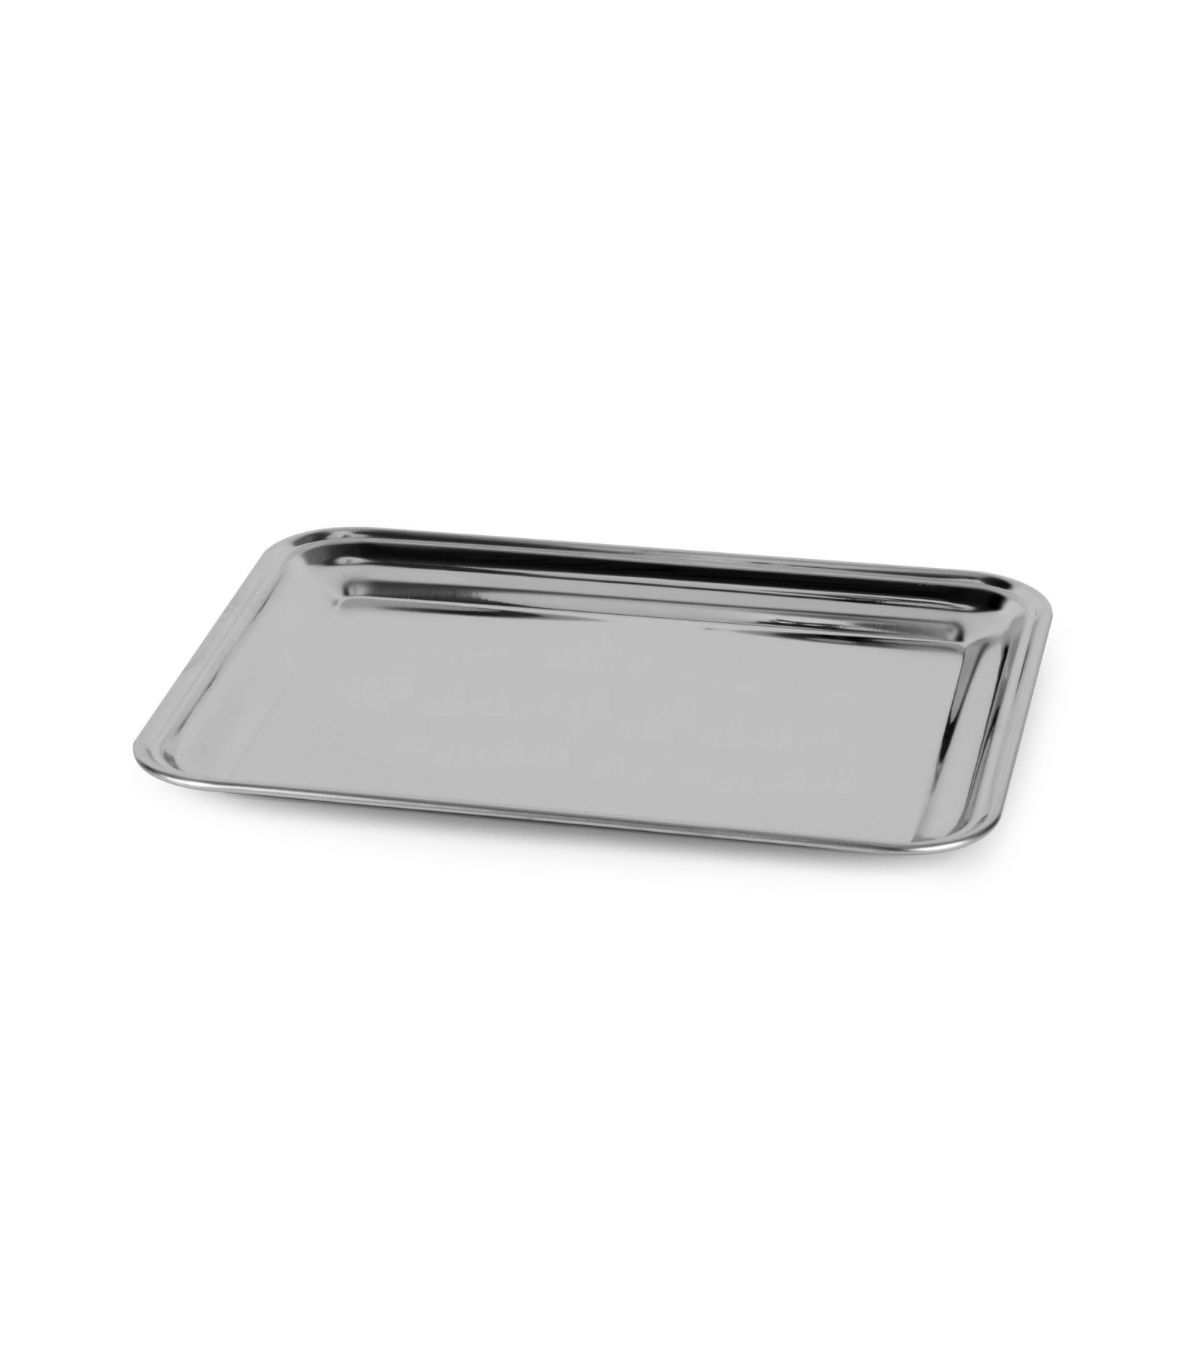 Serving tray Sancy 40 x 31 cm stainless steel 18/10